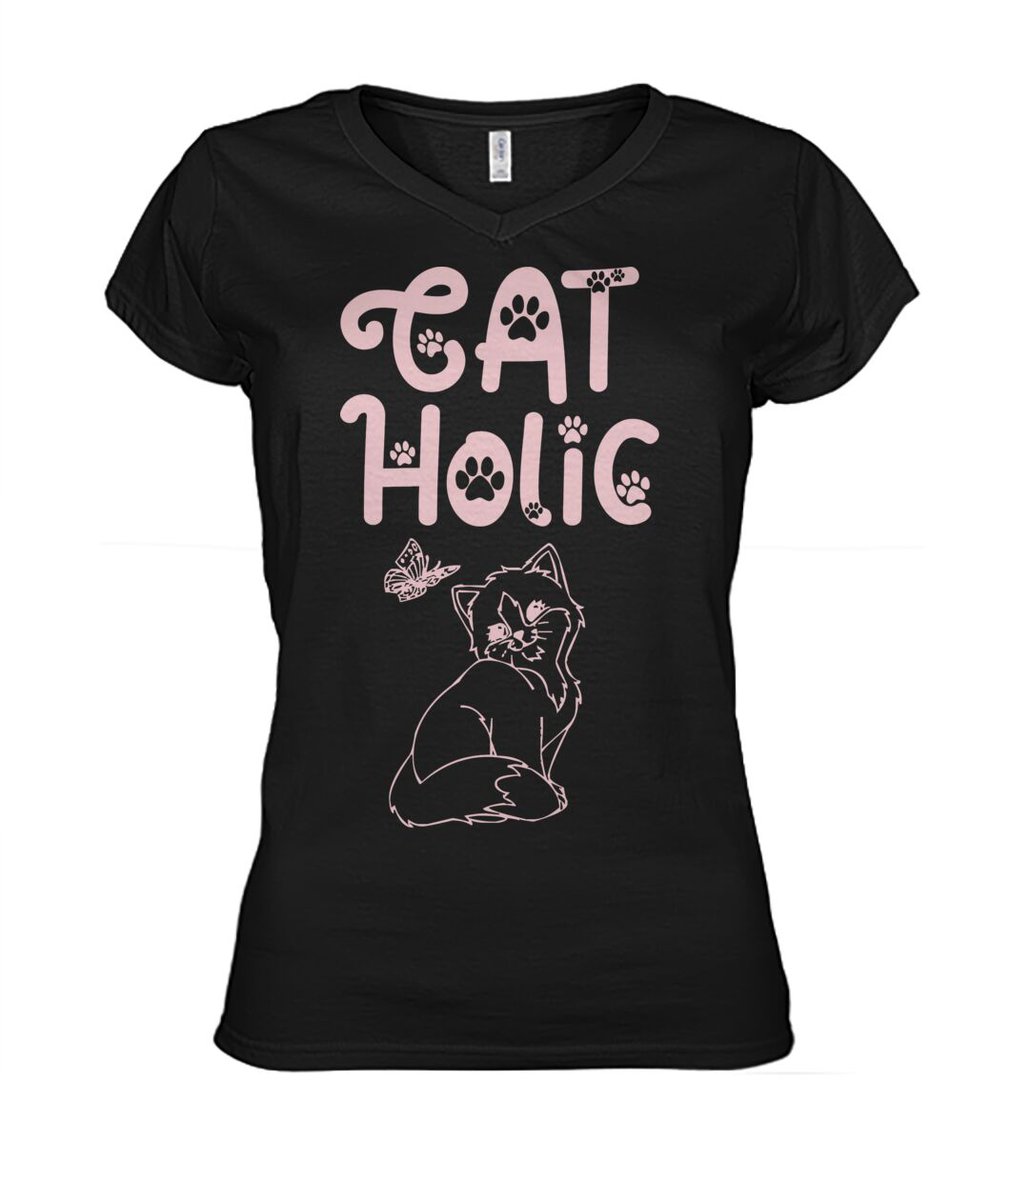 🐱 Get ready to purrfect your style with the adorable Cat Holic, Cat Lover t-shirts! 😻 Featuring cats in paw-some font typography and a cute kitty design. 🌟 Grab yours meow and show off your feline love! #CatHolic #CatLover #MeowFashion 😺👕✨
viralstyle.com/c/2M4rEz